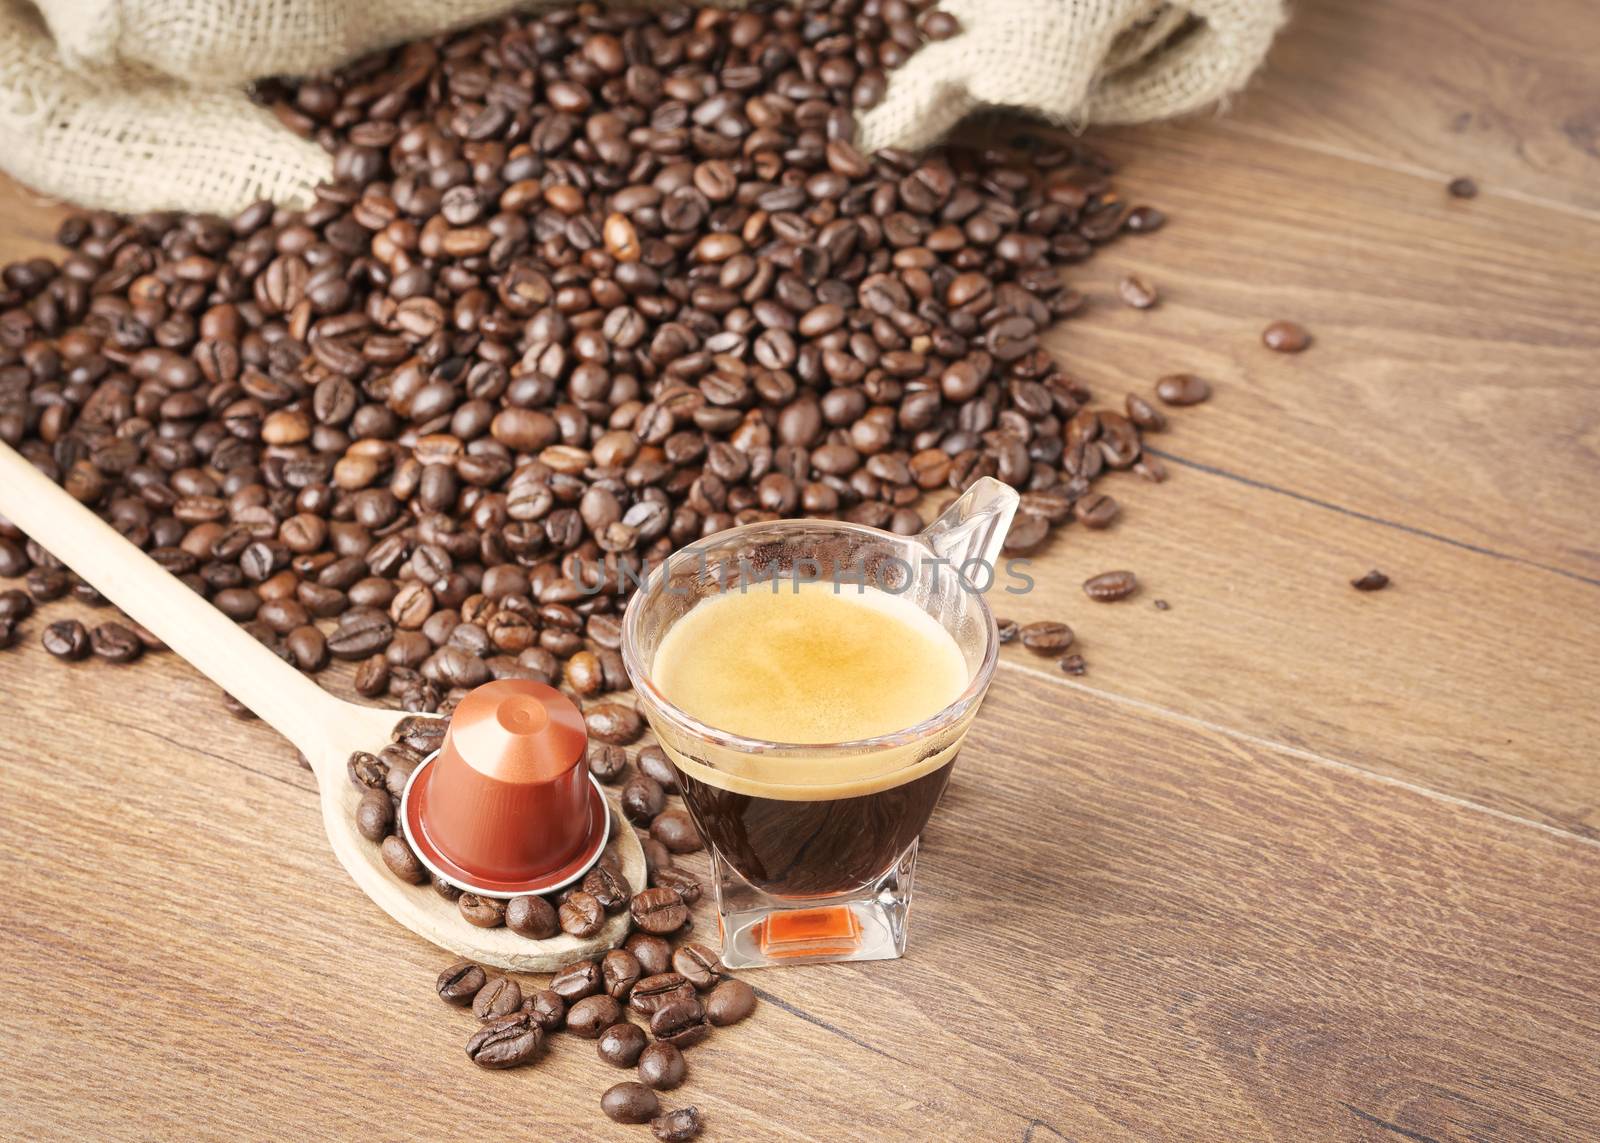 Cup of coffee with coffee capsule on wooden spoon, roasted coffee beans on wooden background,top view.